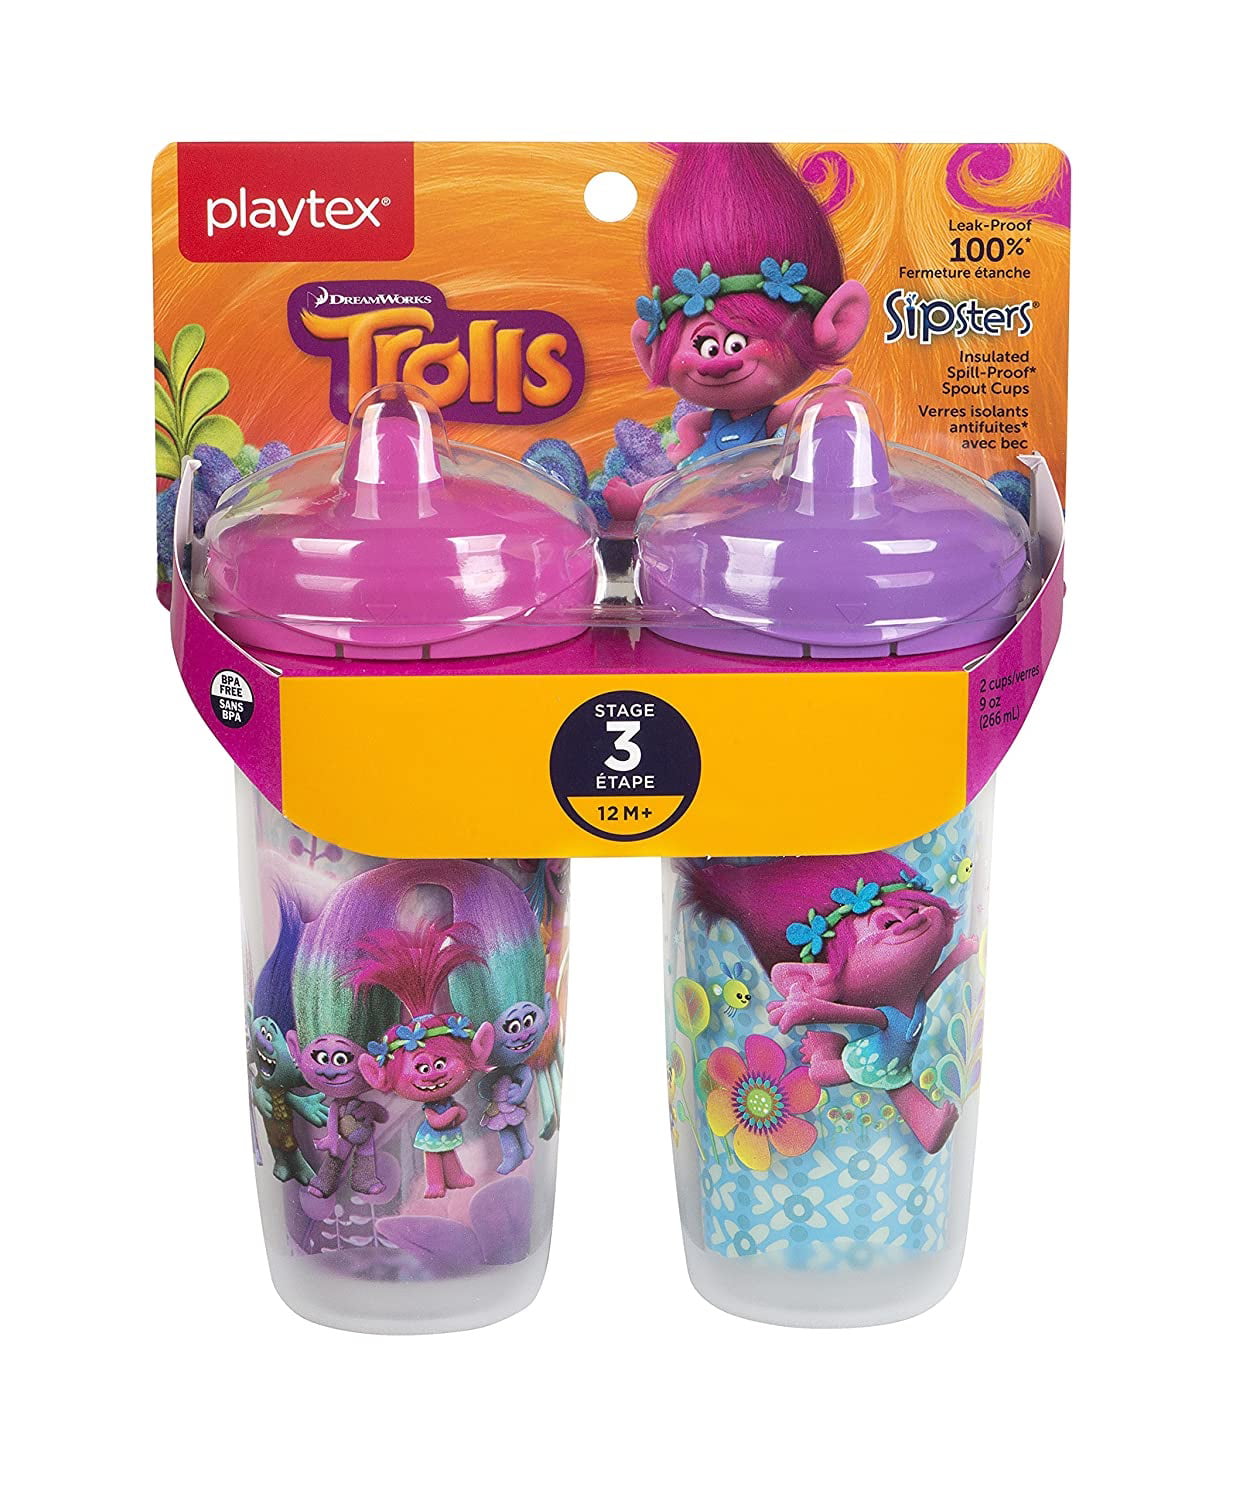 Dreamwork Trolls Sippy Cup Bottle With Straw Handle BPA FREE PLASTIC 